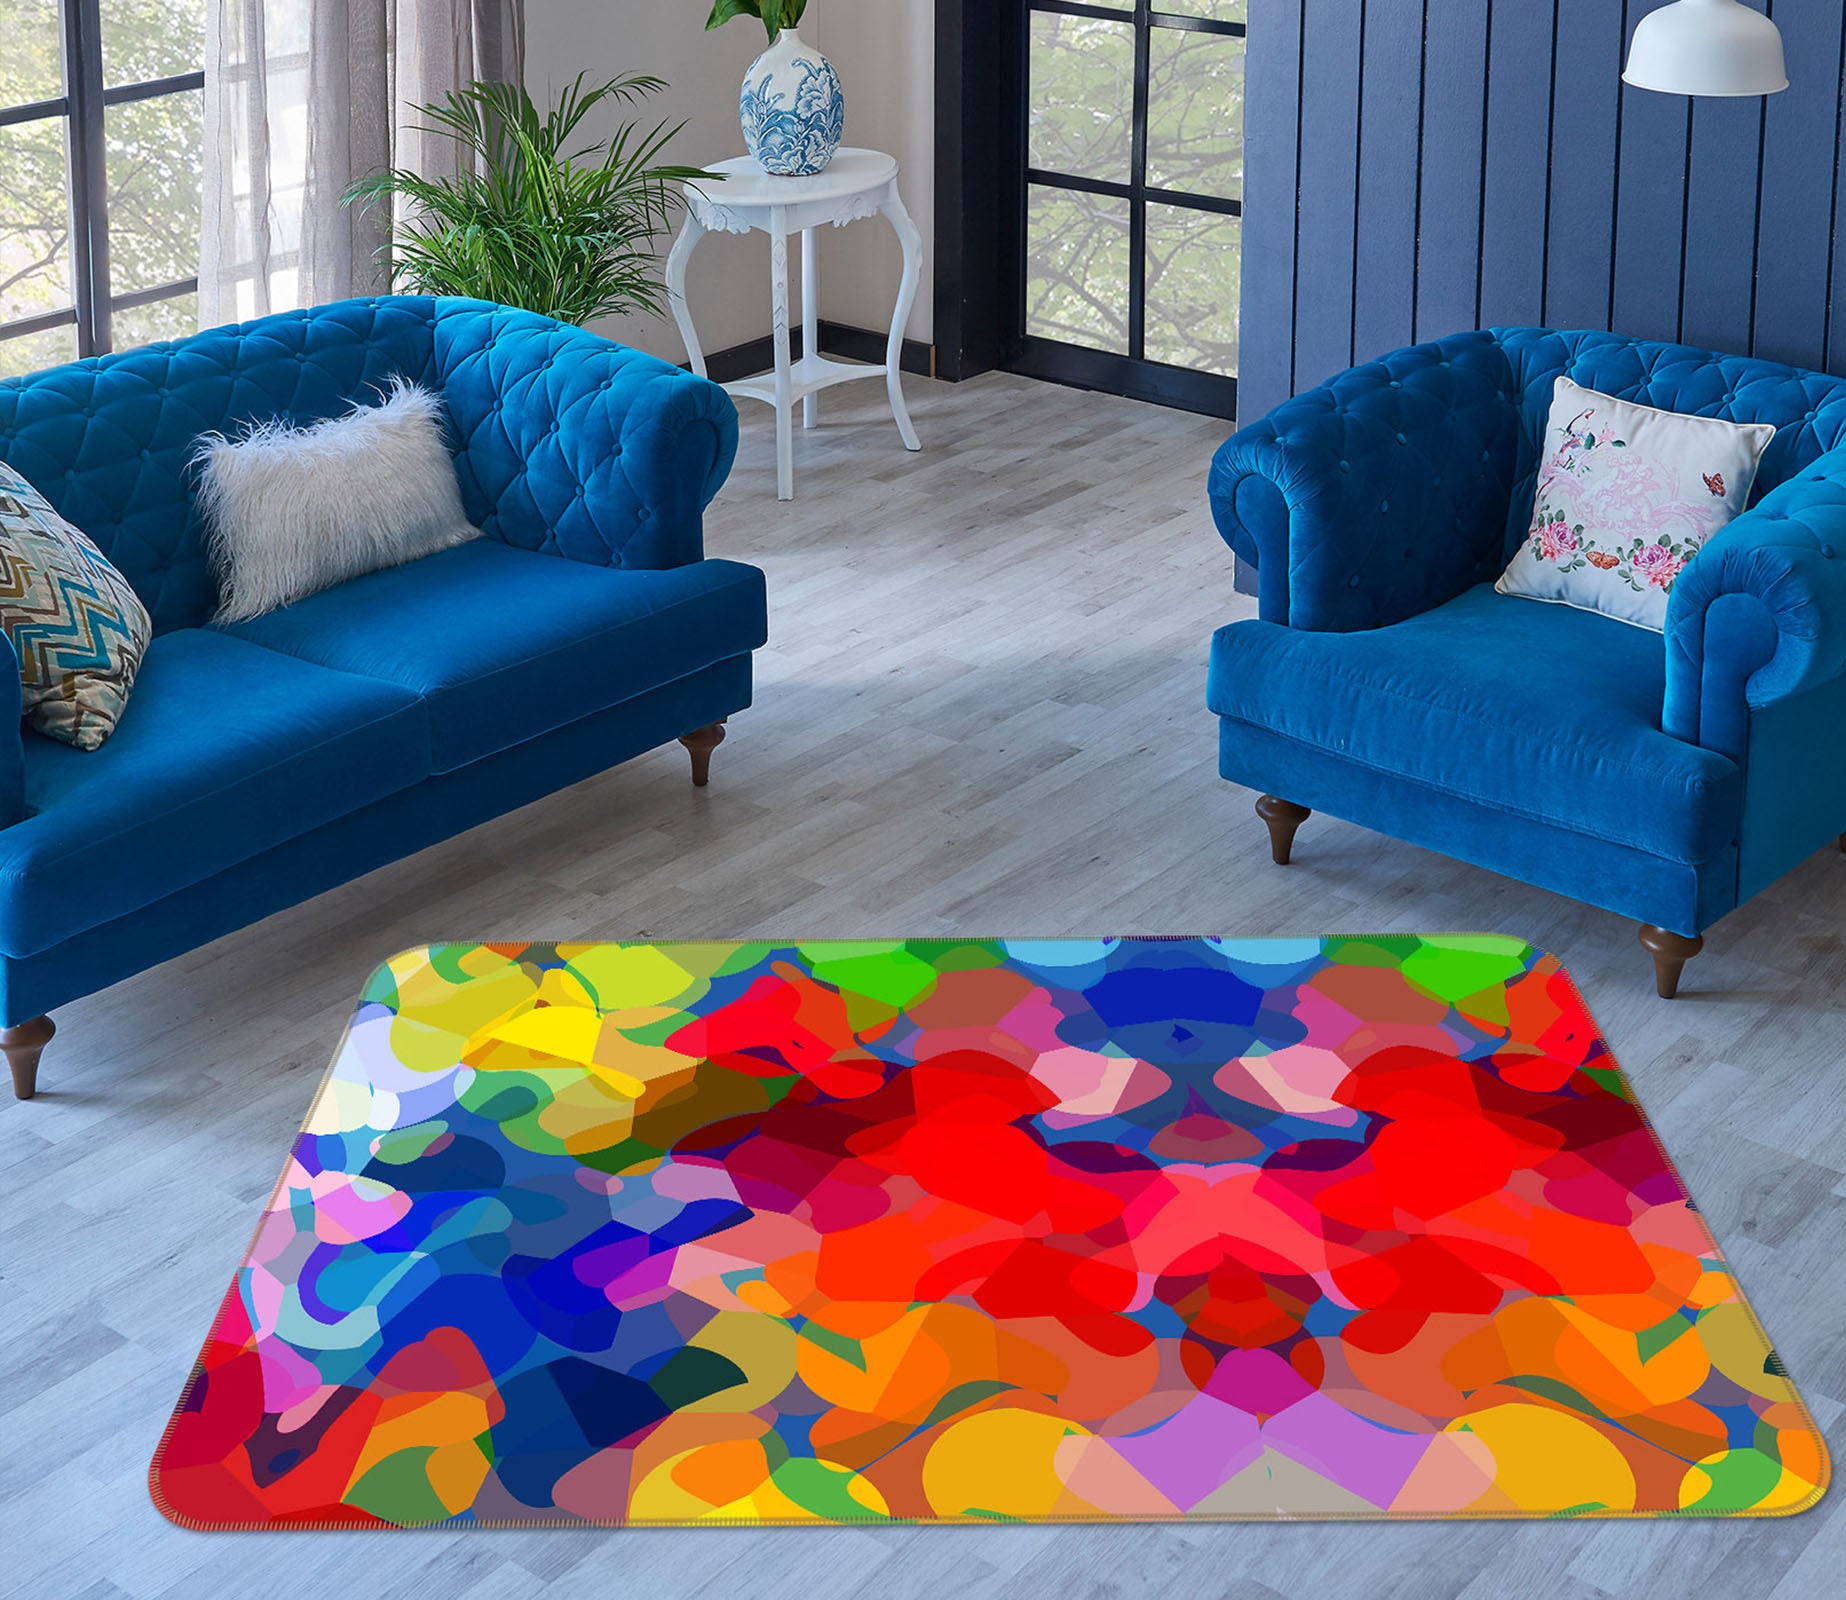 3D Colorful Pattern 1009 Shandra Smith Rug Non Slip Rug Mat